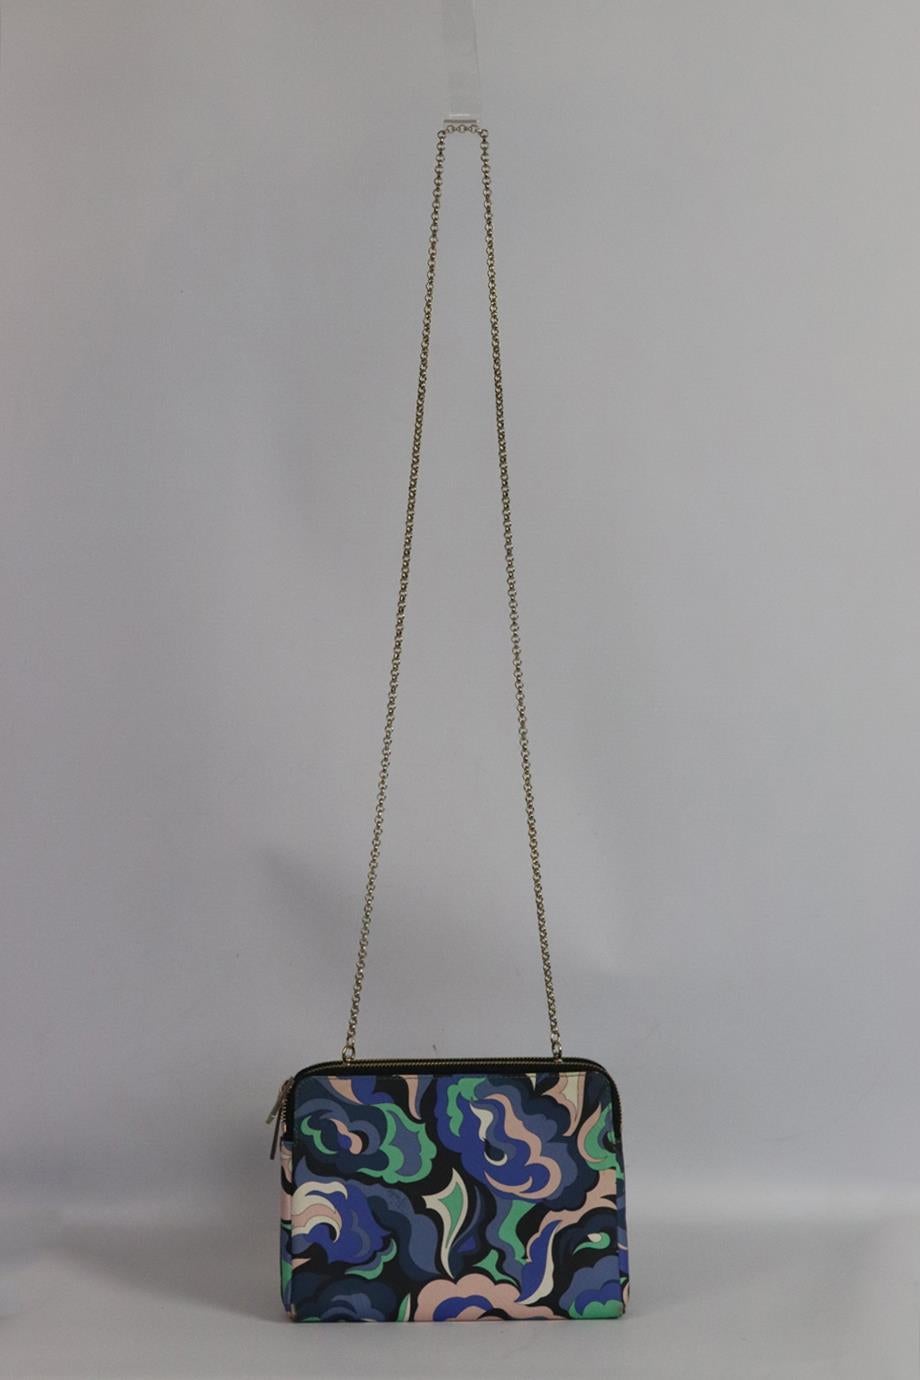 Emilio Pucci two in one printed textured leather shoulder bag. Made multicoloured textured leather with the brand’s iconic print and signature, there are two detachable pouches that can be carried seperately. Multicoloured. Zip fastening at top.